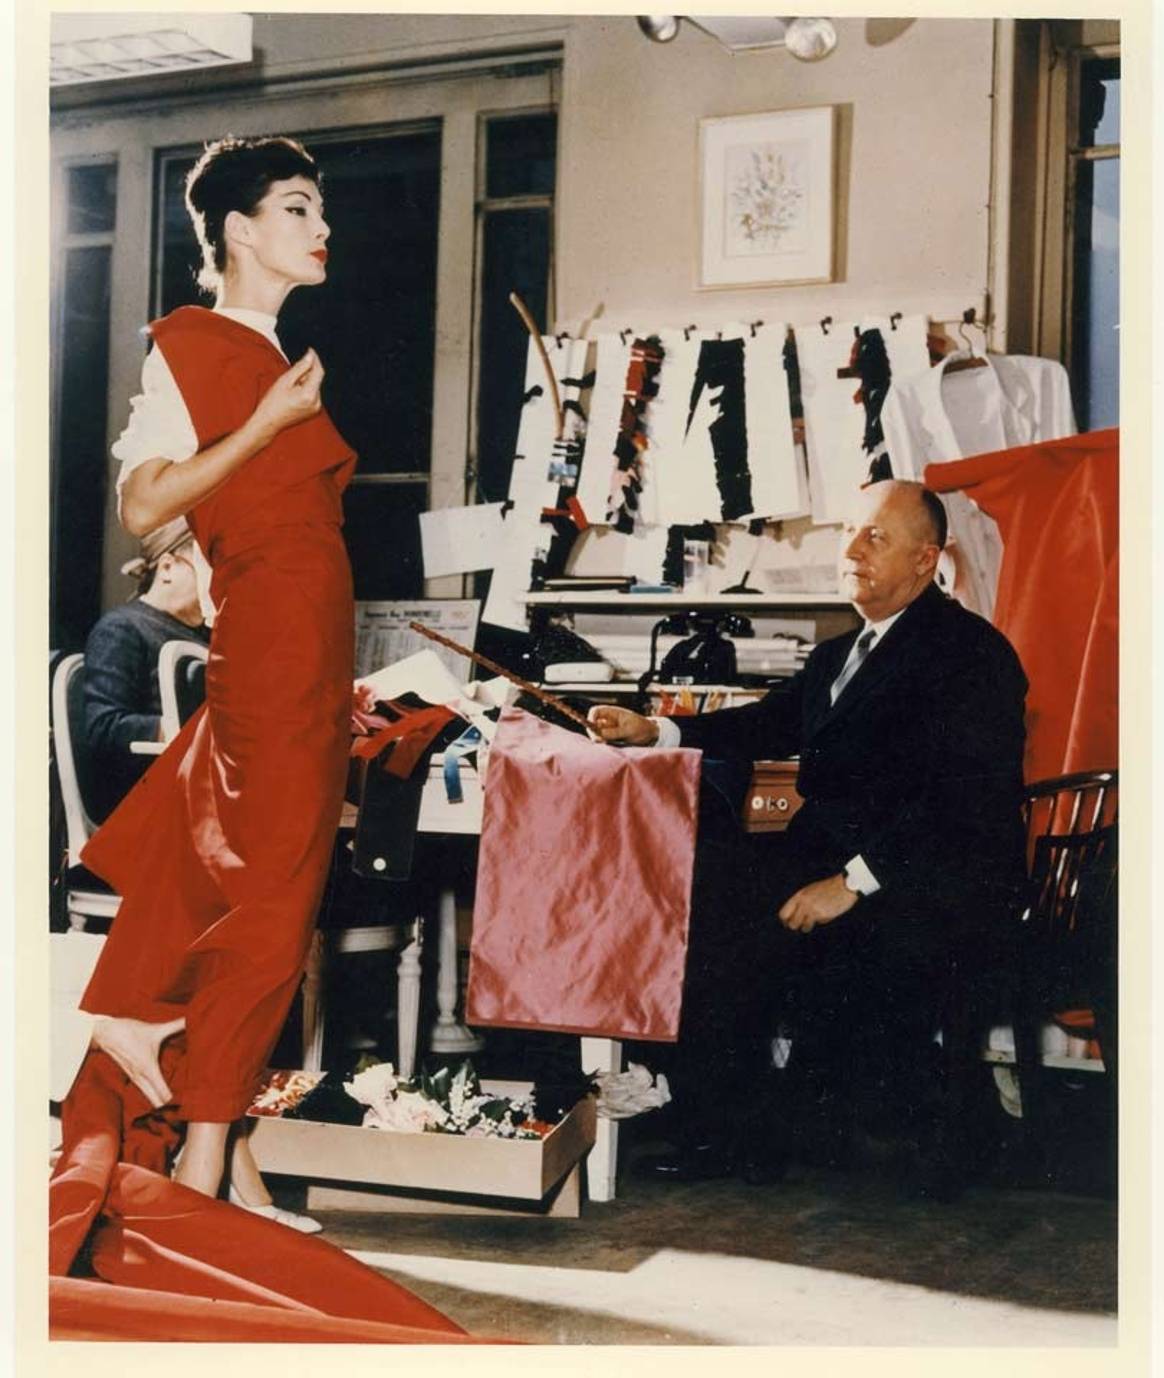 V&A to stage largest Christian Dior exhibition in the UK